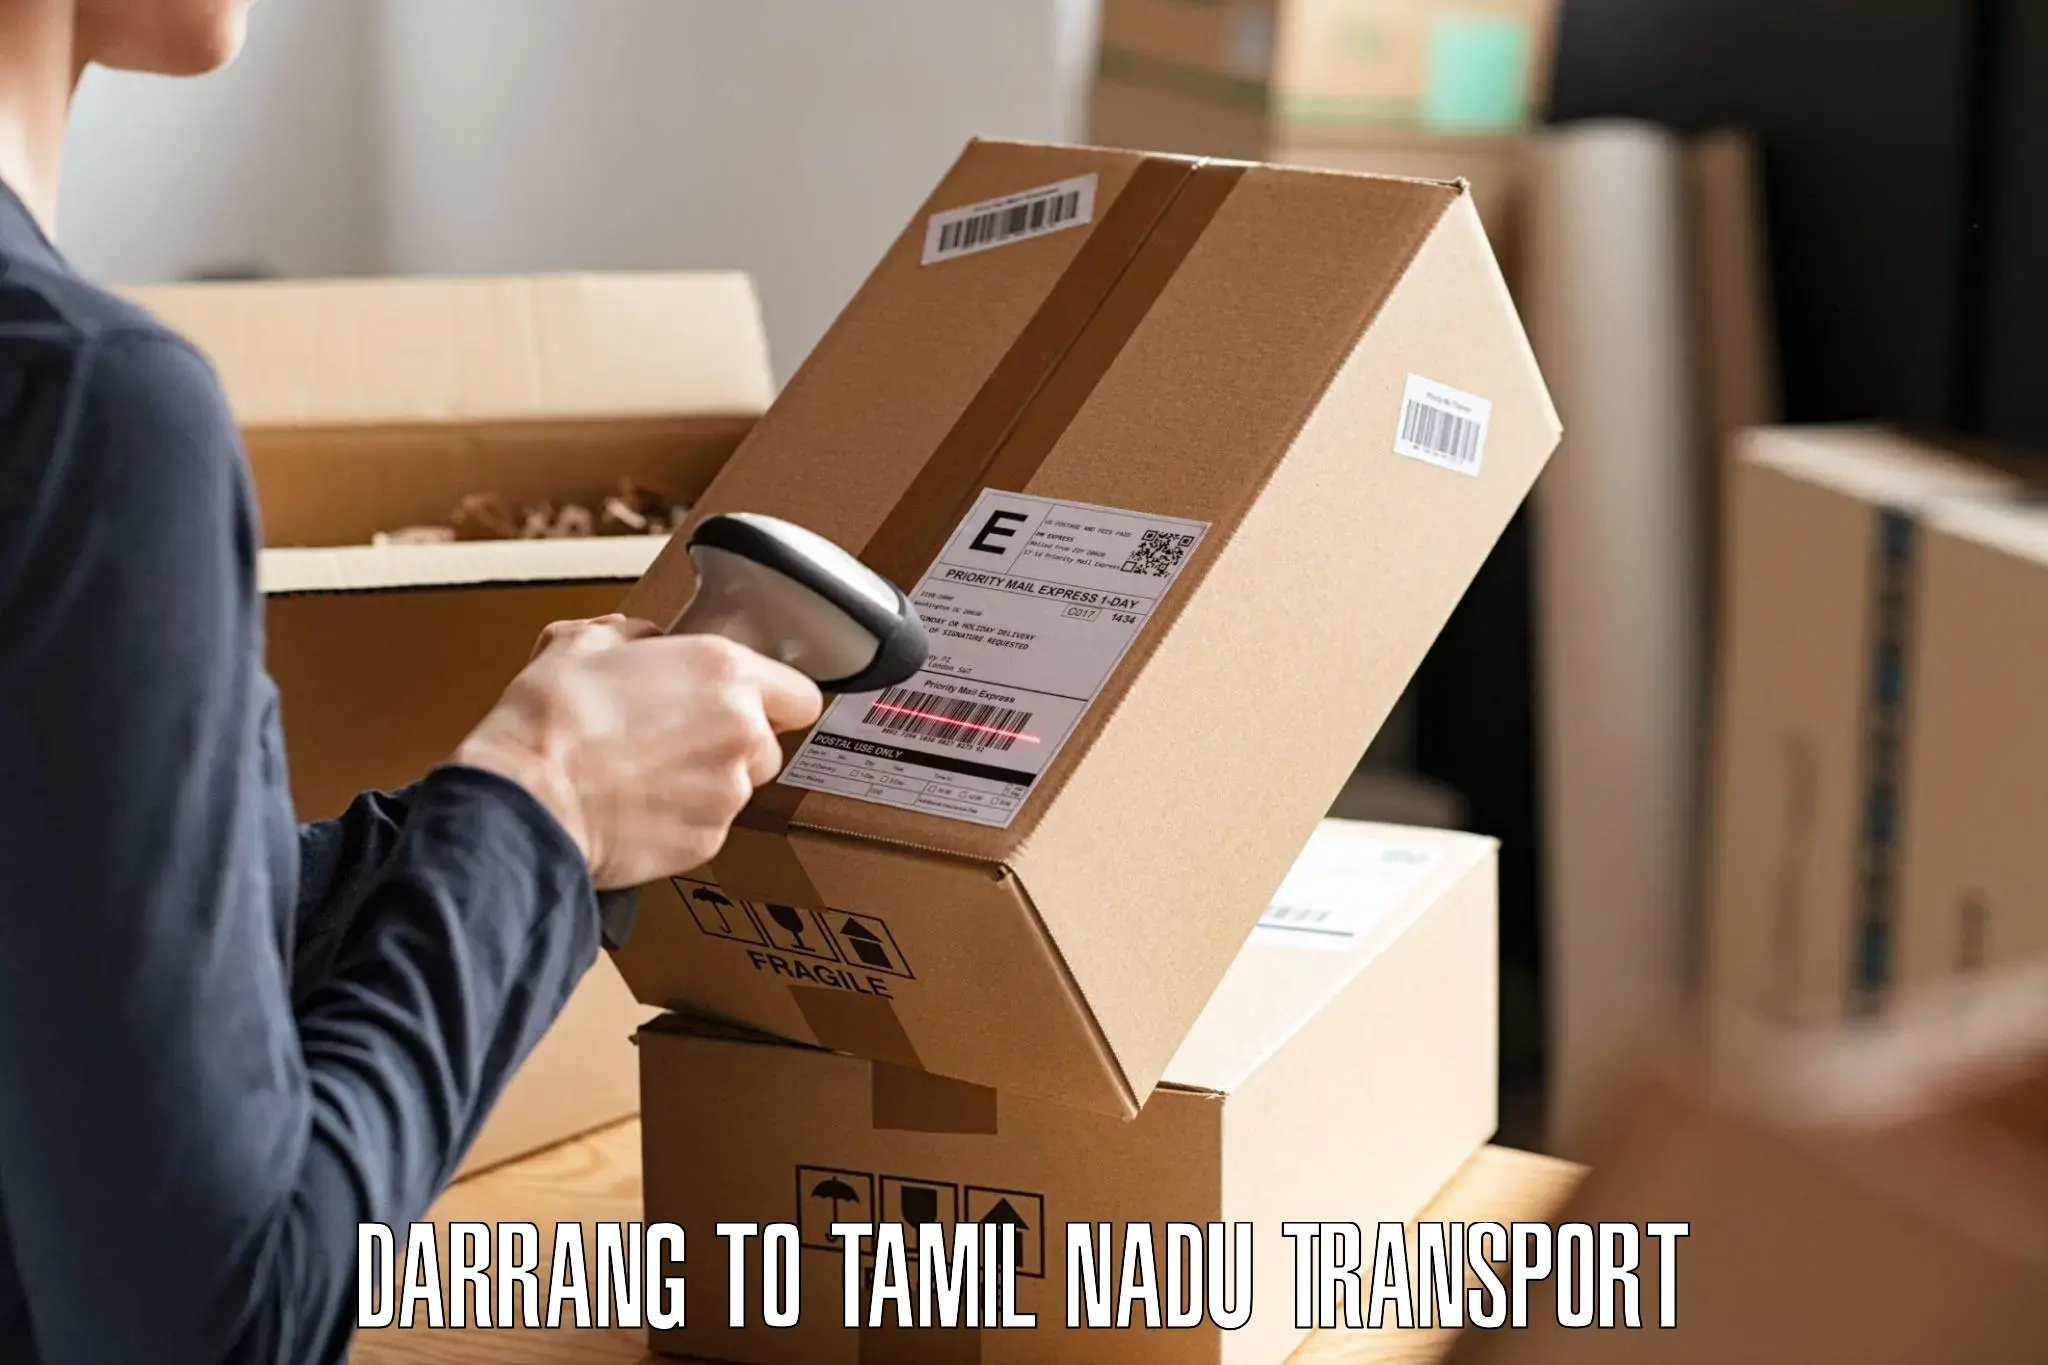 Daily parcel service transport Darrang to Chennai